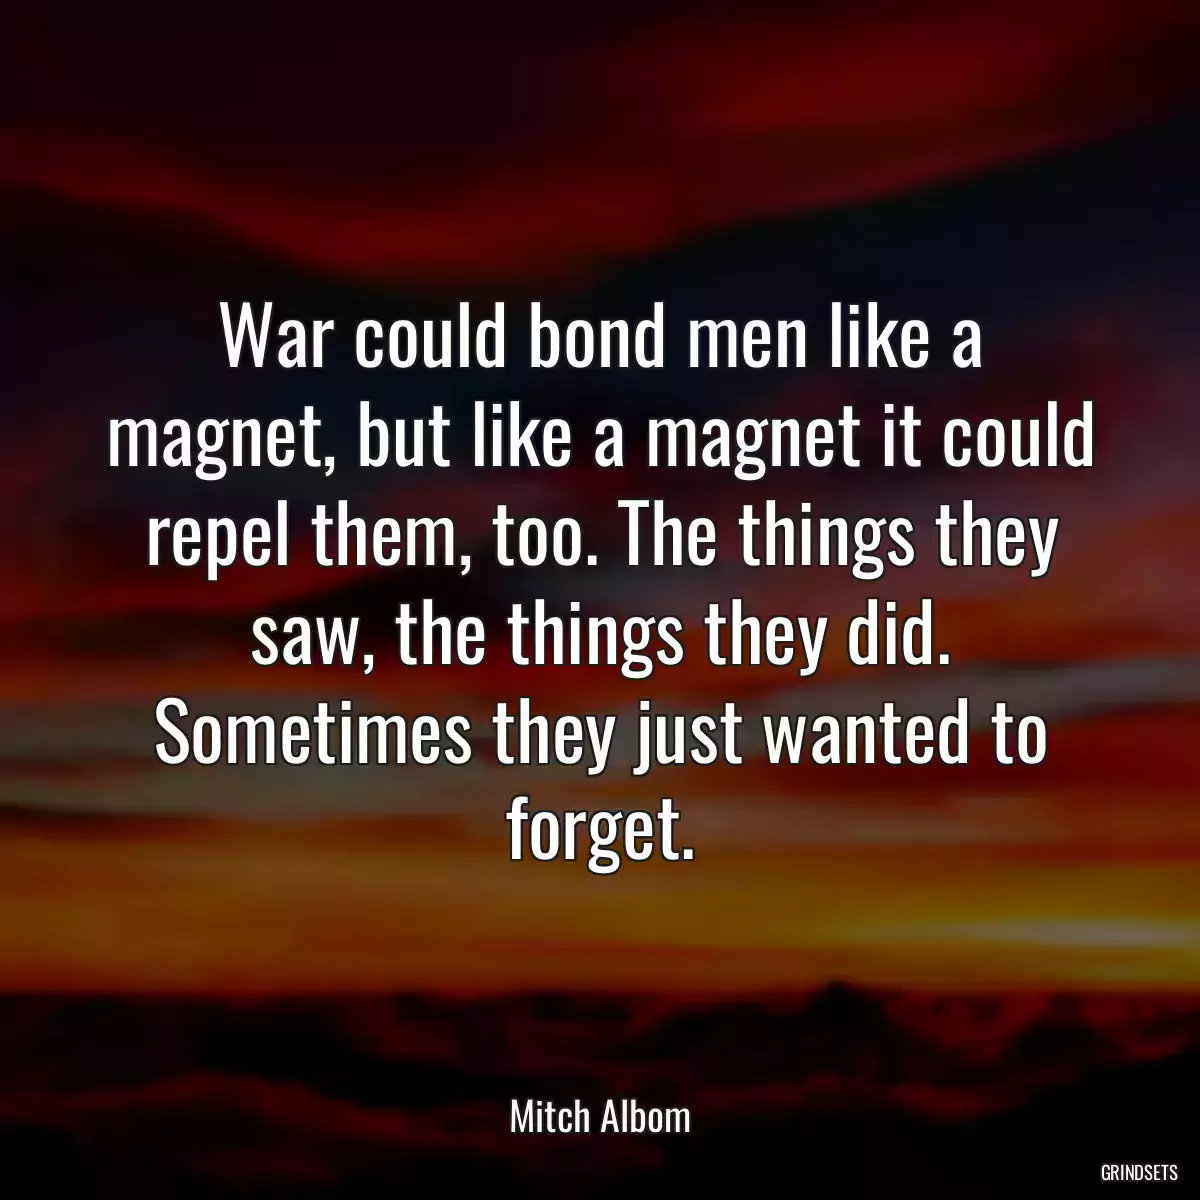 War could bond men like a magnet, but like a magnet it could repel them, too. The things they saw, the things they did. Sometimes they just wanted to forget.